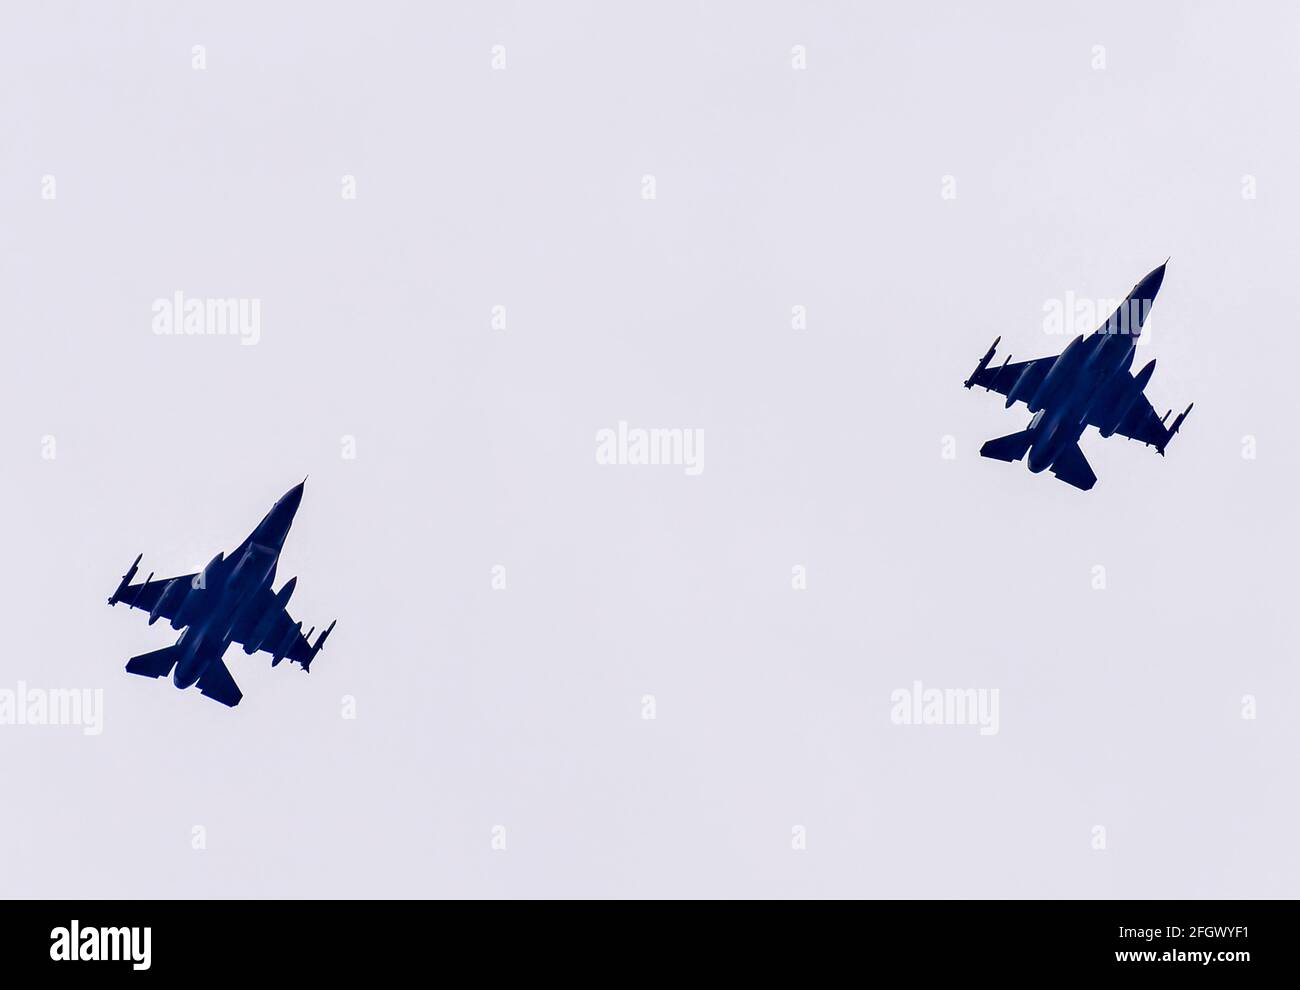 F15 fighter jets pass over a suburban house Stock Photo